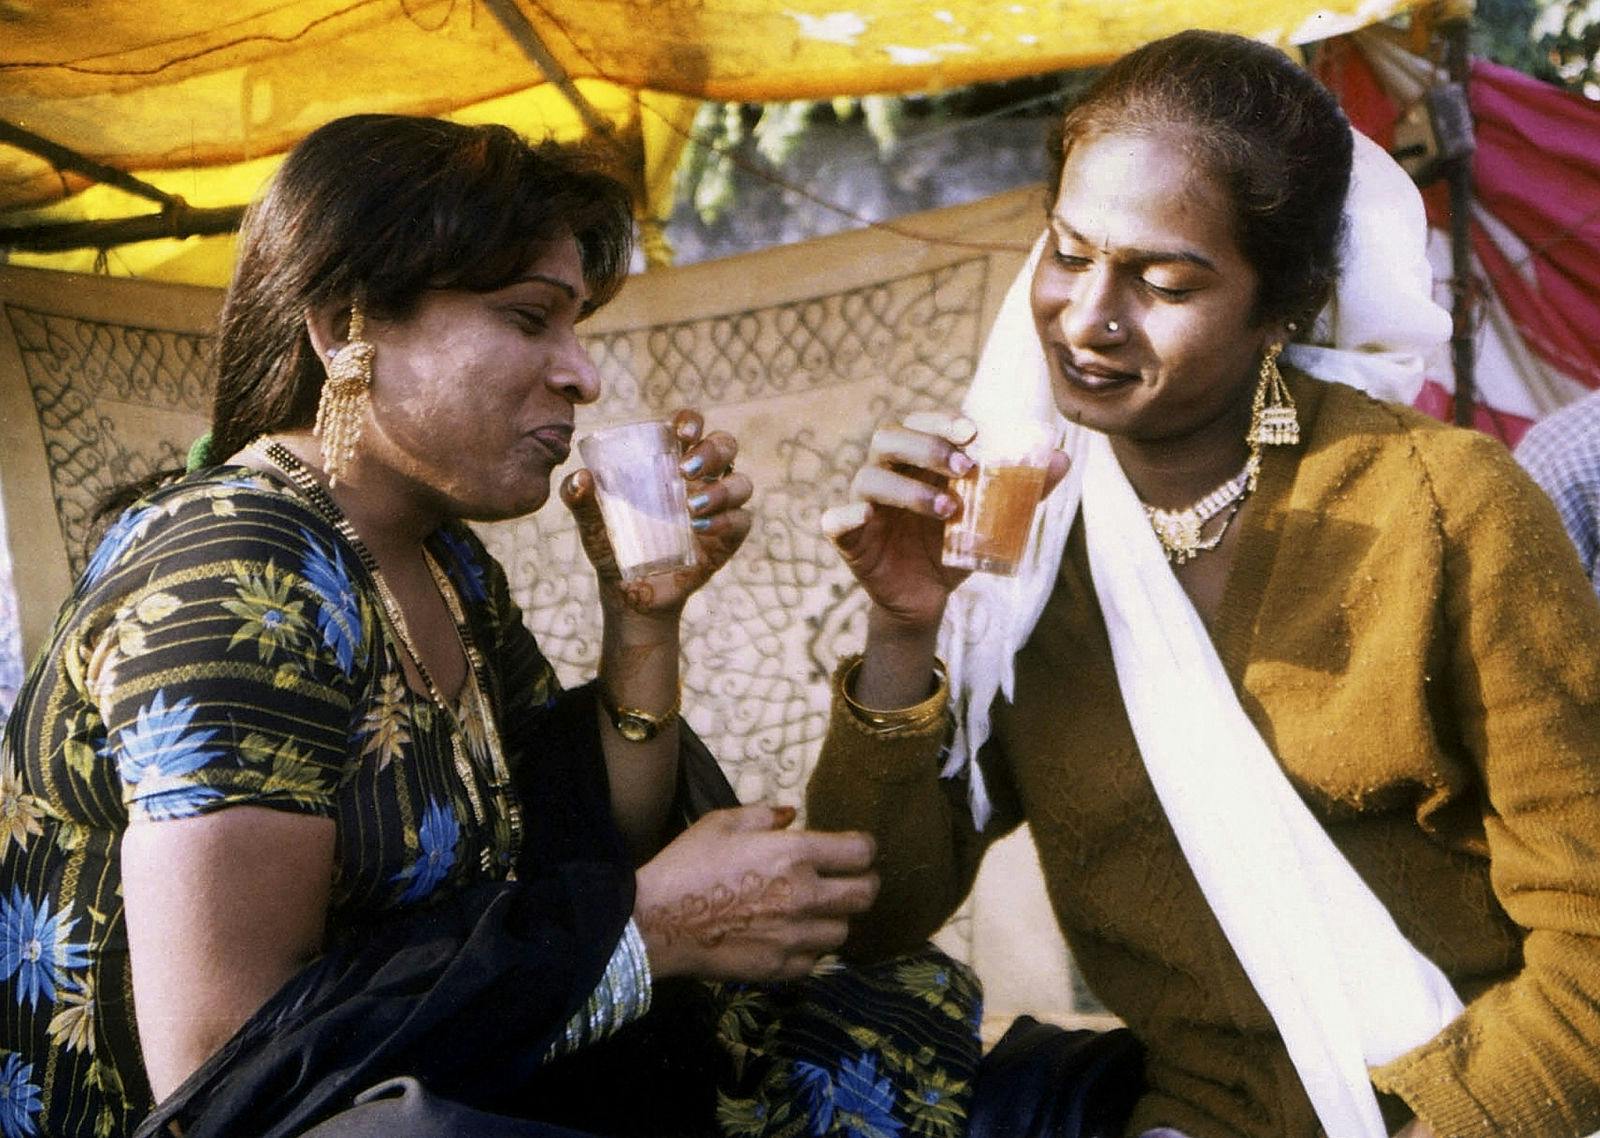 Rekha (L), from New Delhi, and Shabnam from Bombay sipping cups of tea in Varanasi during a convention (PAWAN KUMAR/AFP via Getty Images)